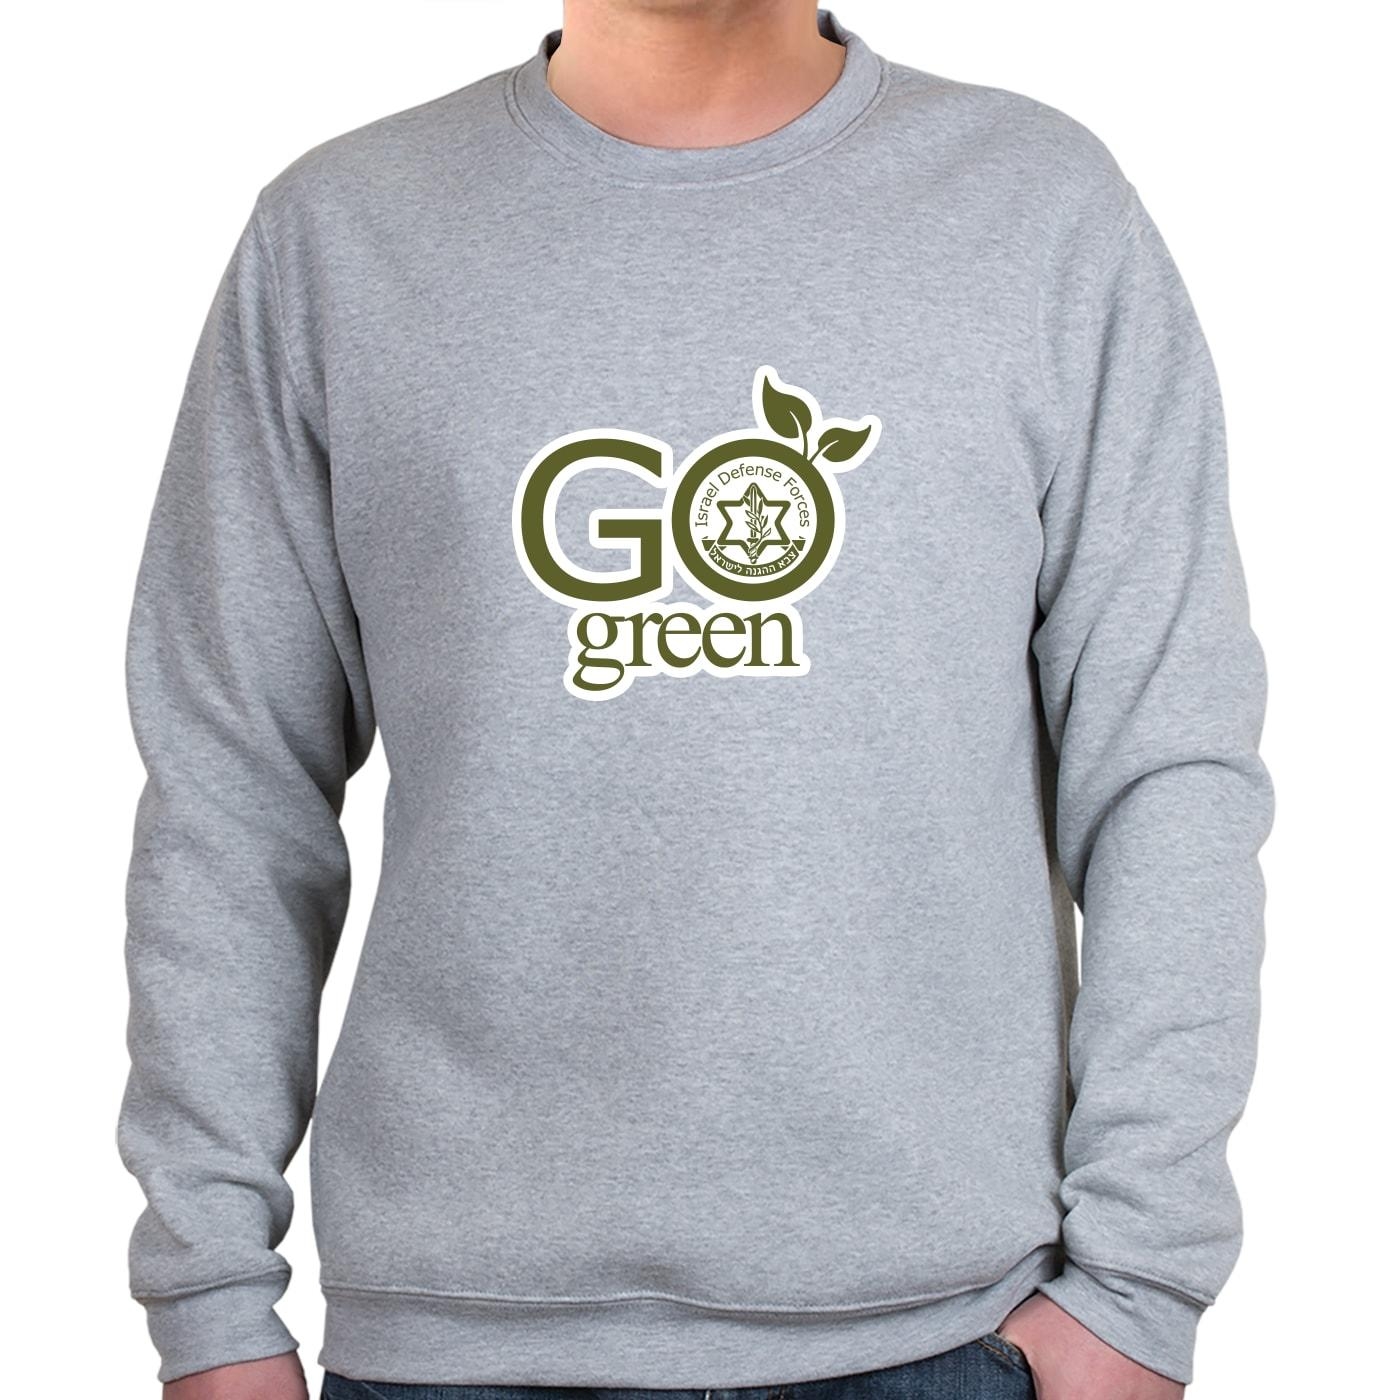 Go Green Sweatshirt with IDF Insignia (Choice of Colors) - 2